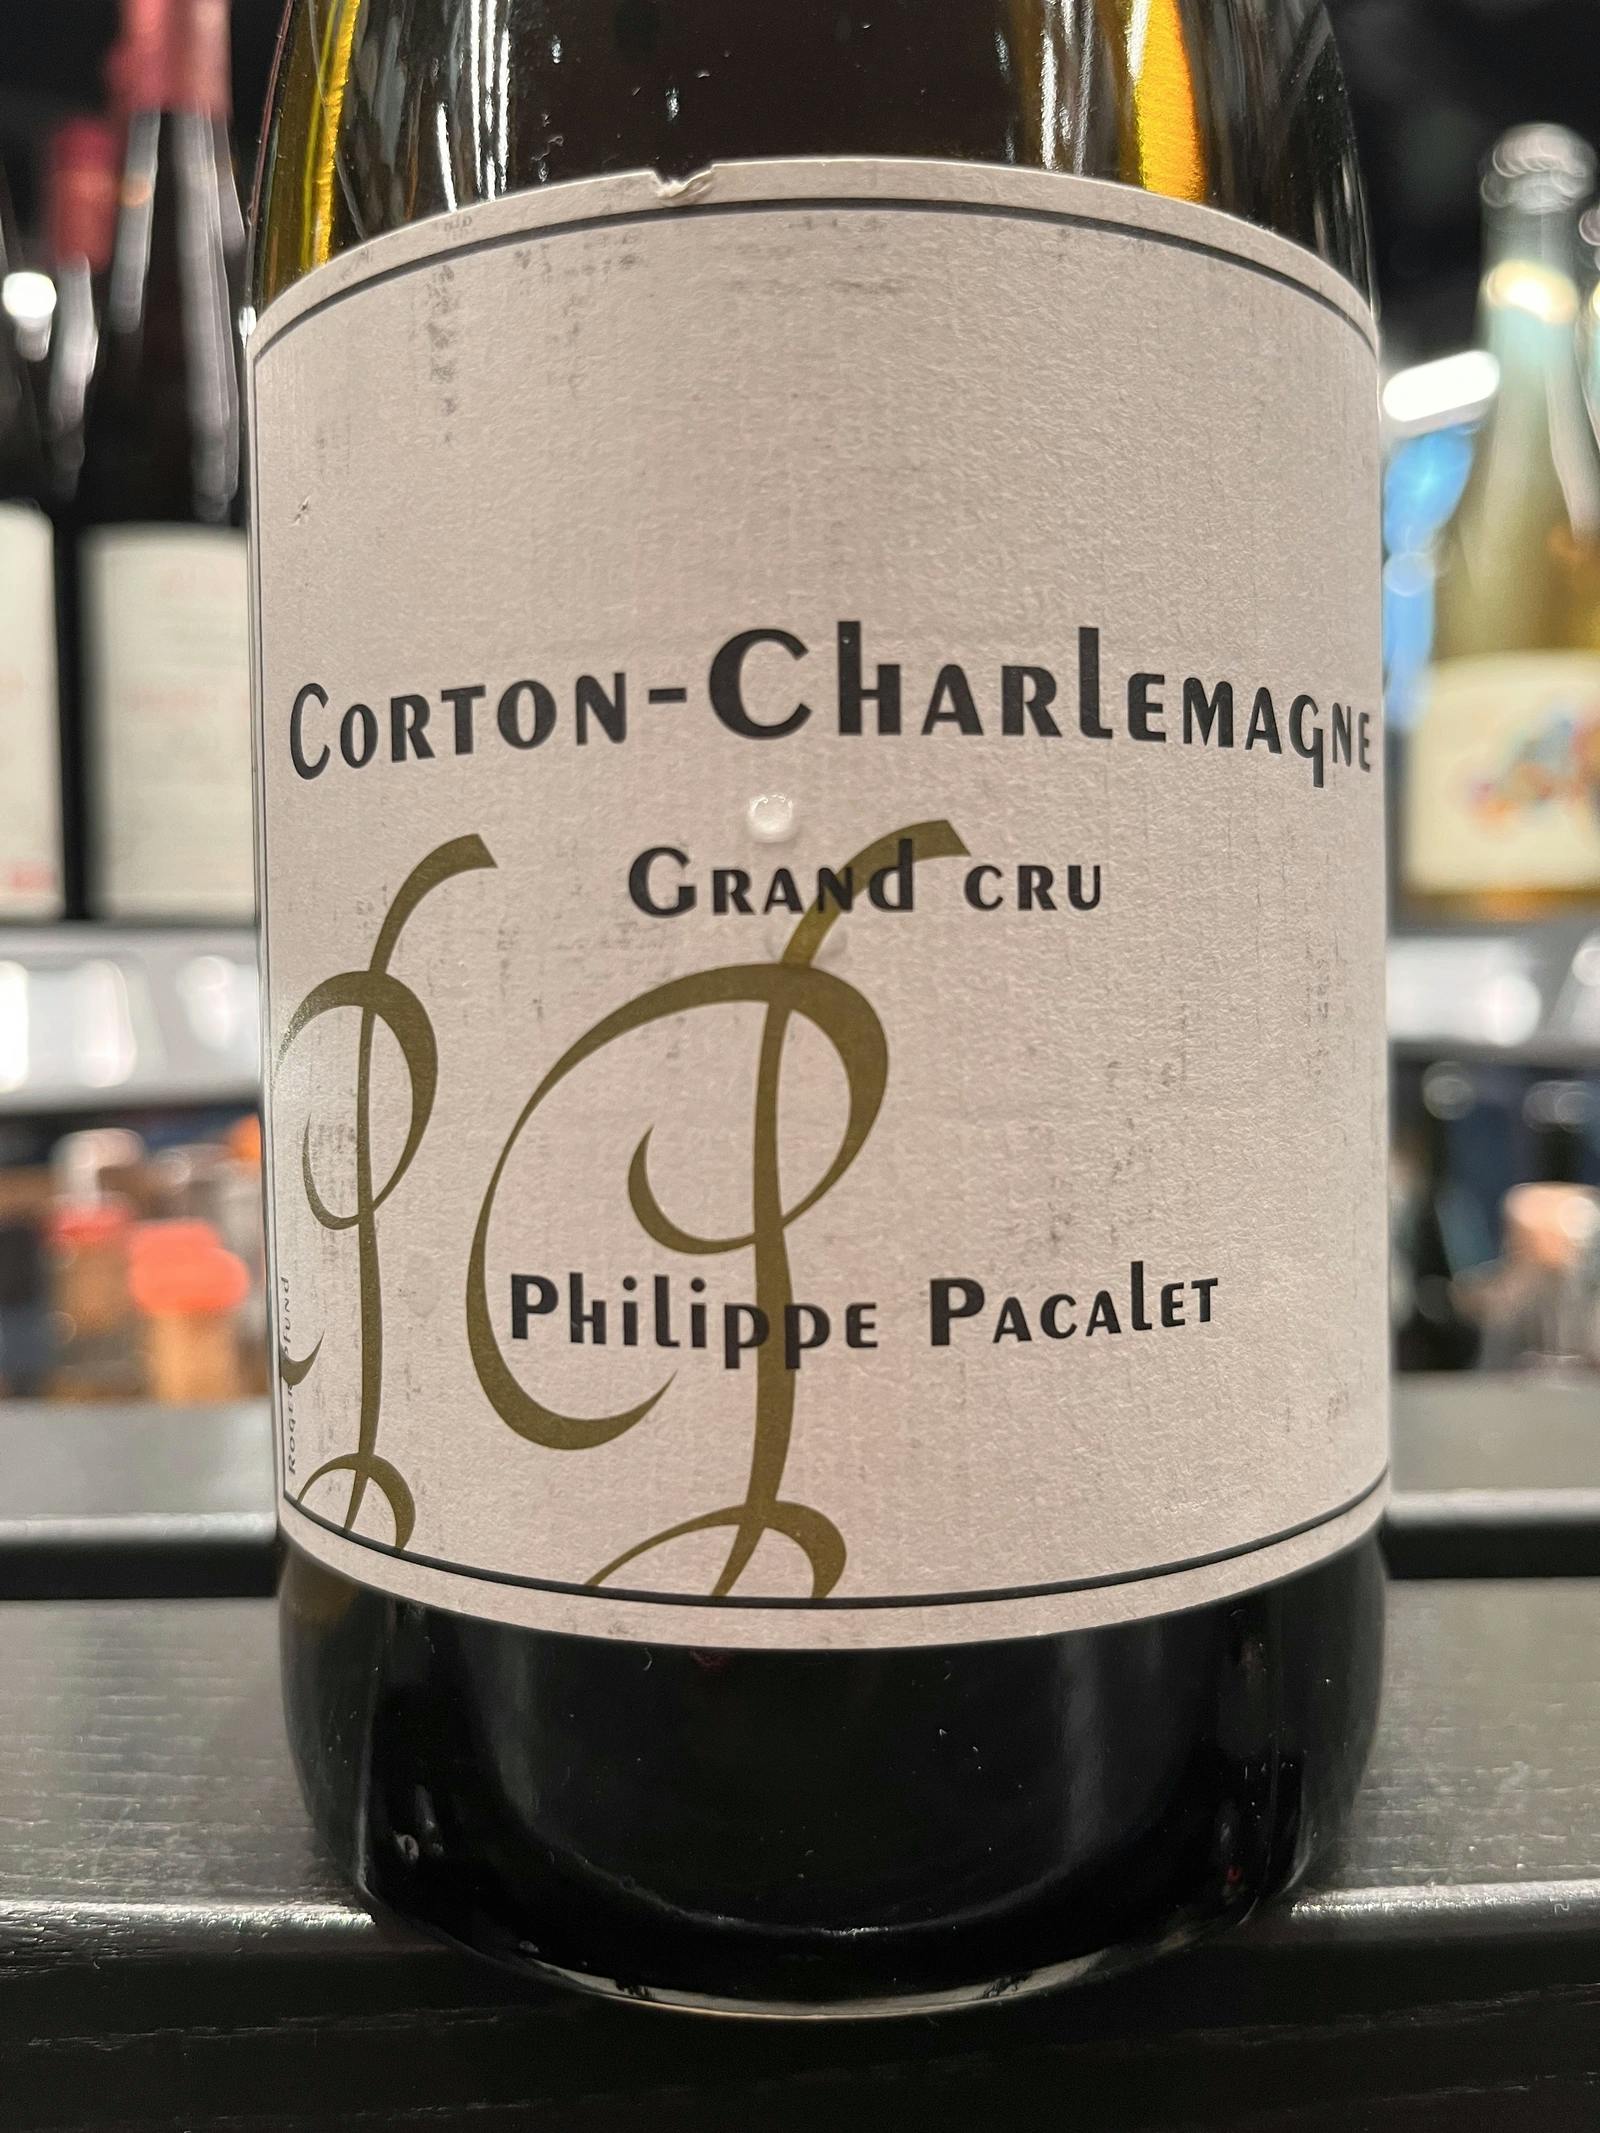 Philippe Pacalet Corton-Charlemagne Grand Cru 2011